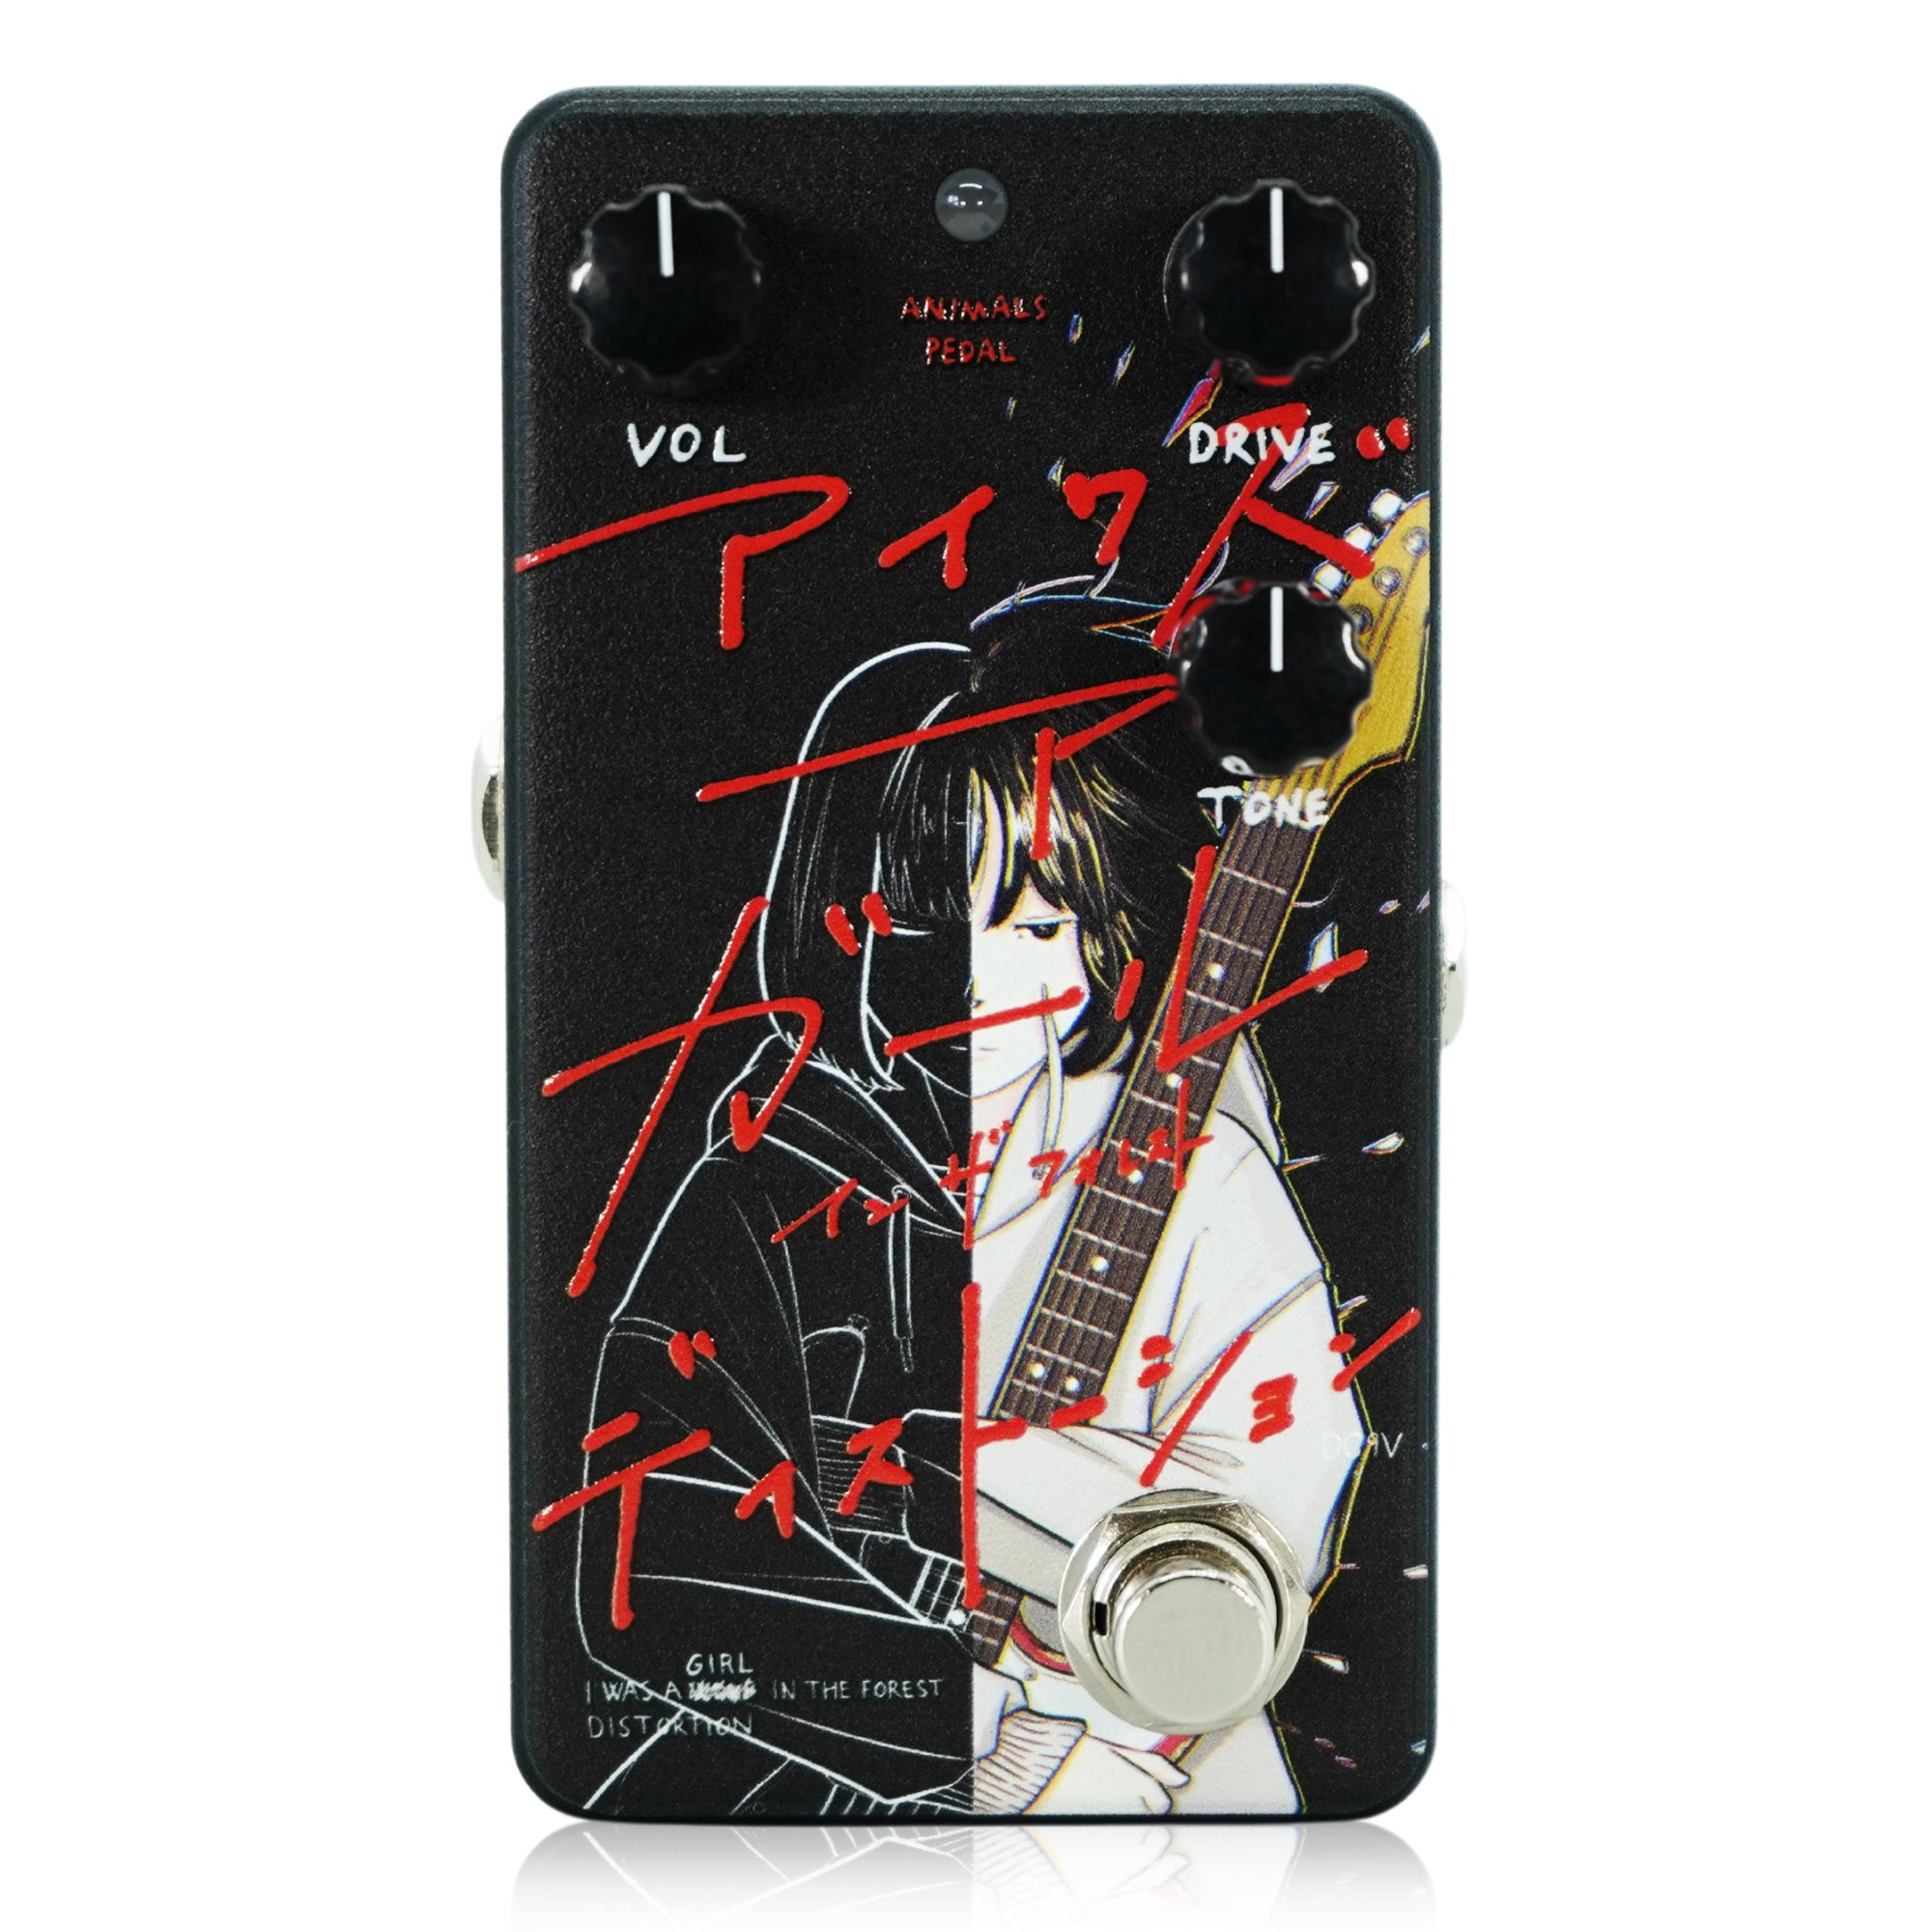 Animals Pedal Custom Illustrated 050 I WAS A GIRL IN THE FOREST DISTORTION  by 生活 